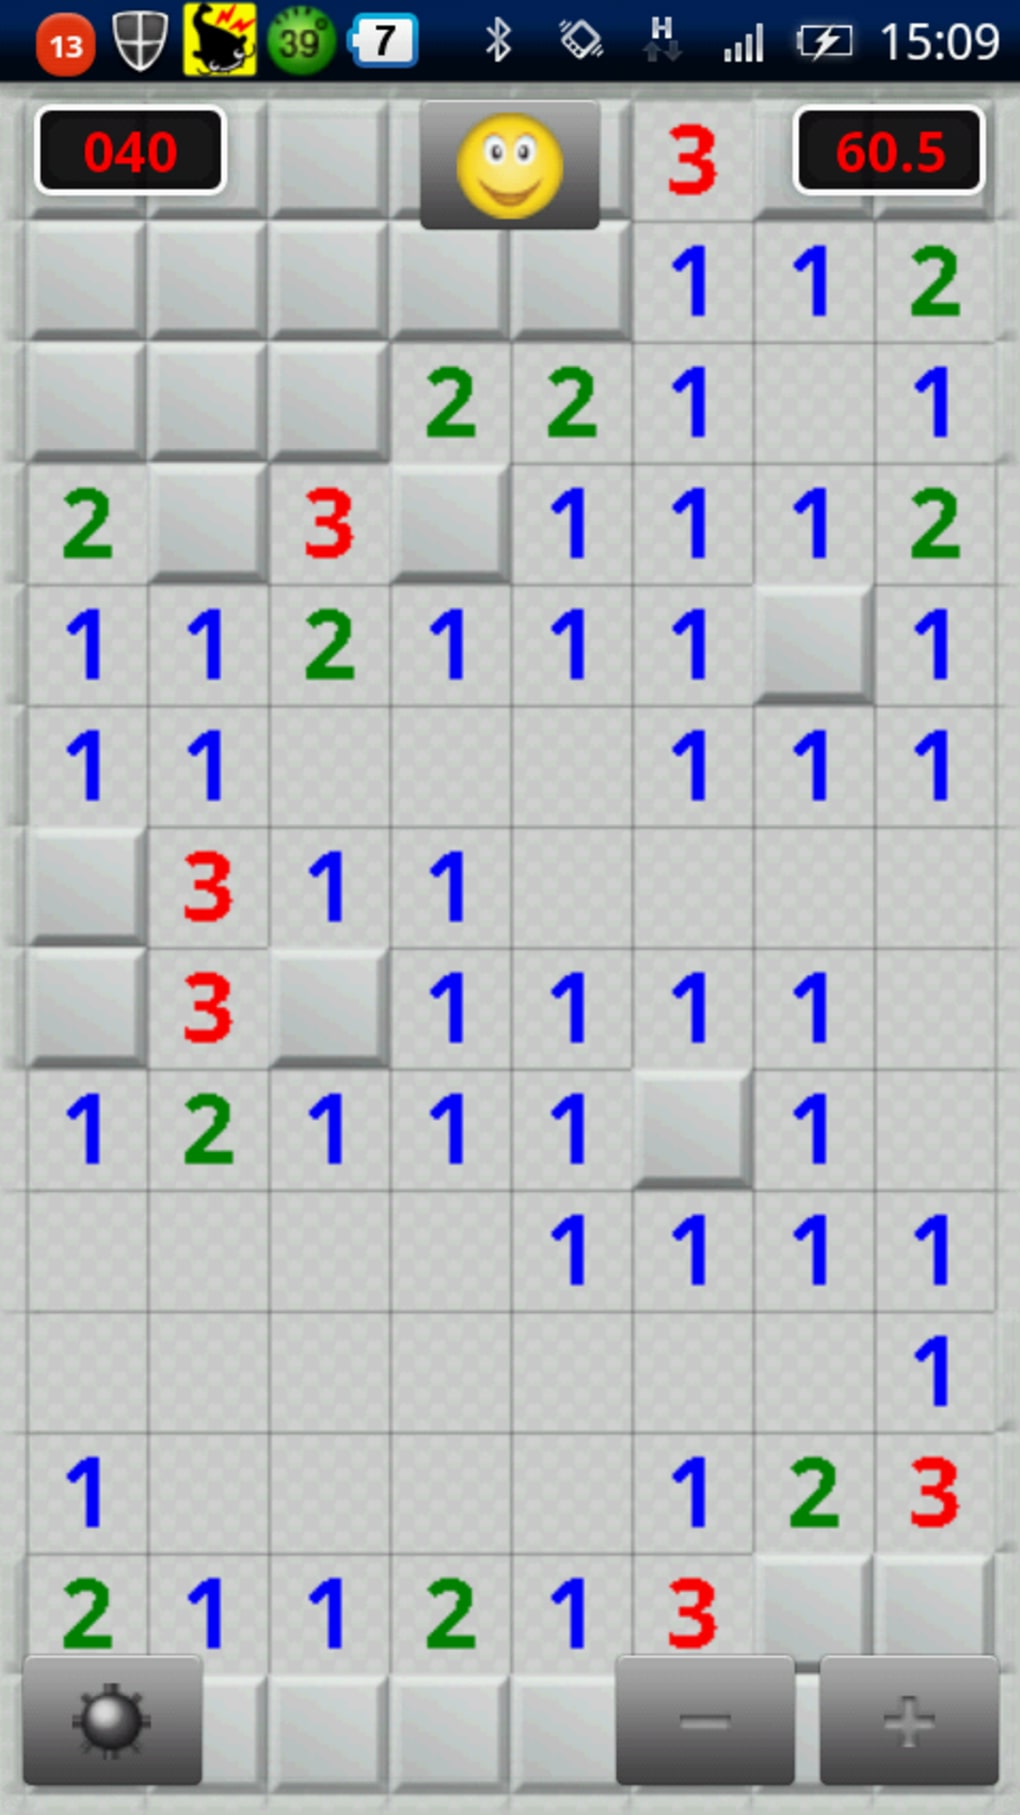 download the last version for android Minesweeper Classic!